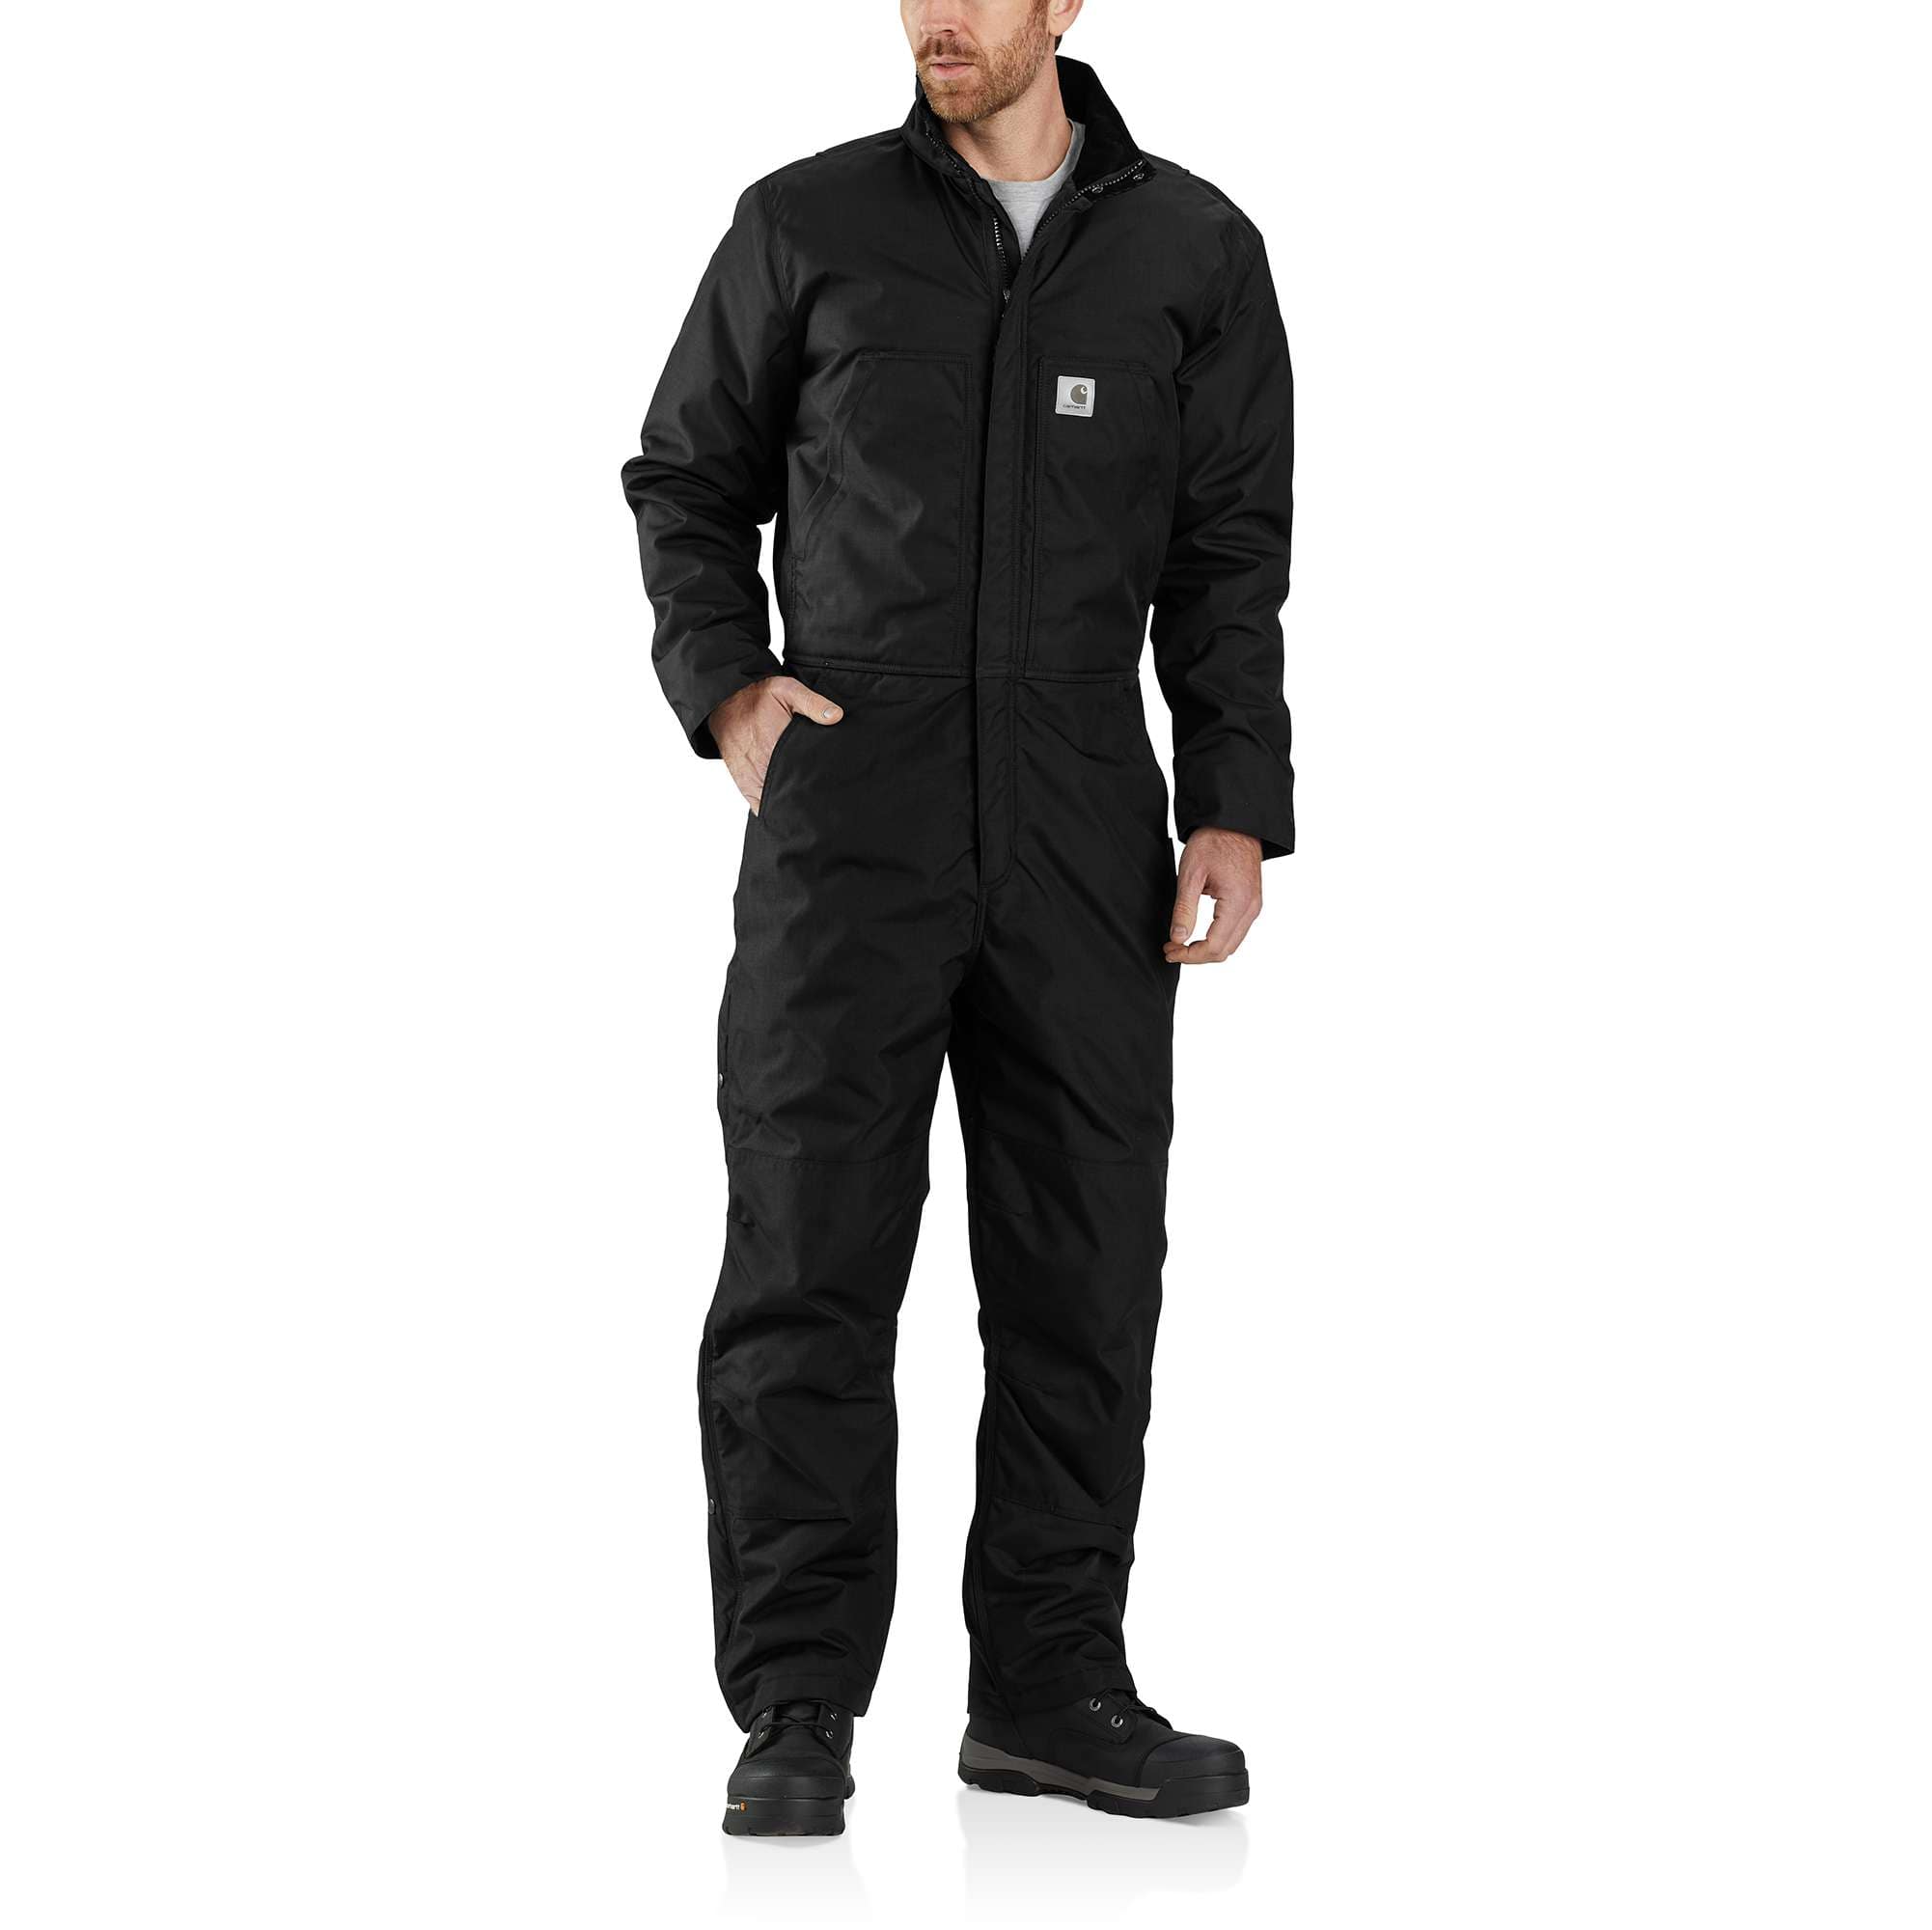 Yukon Extremes™ Insulated Coverall - 4 Extreme Warmth Rating